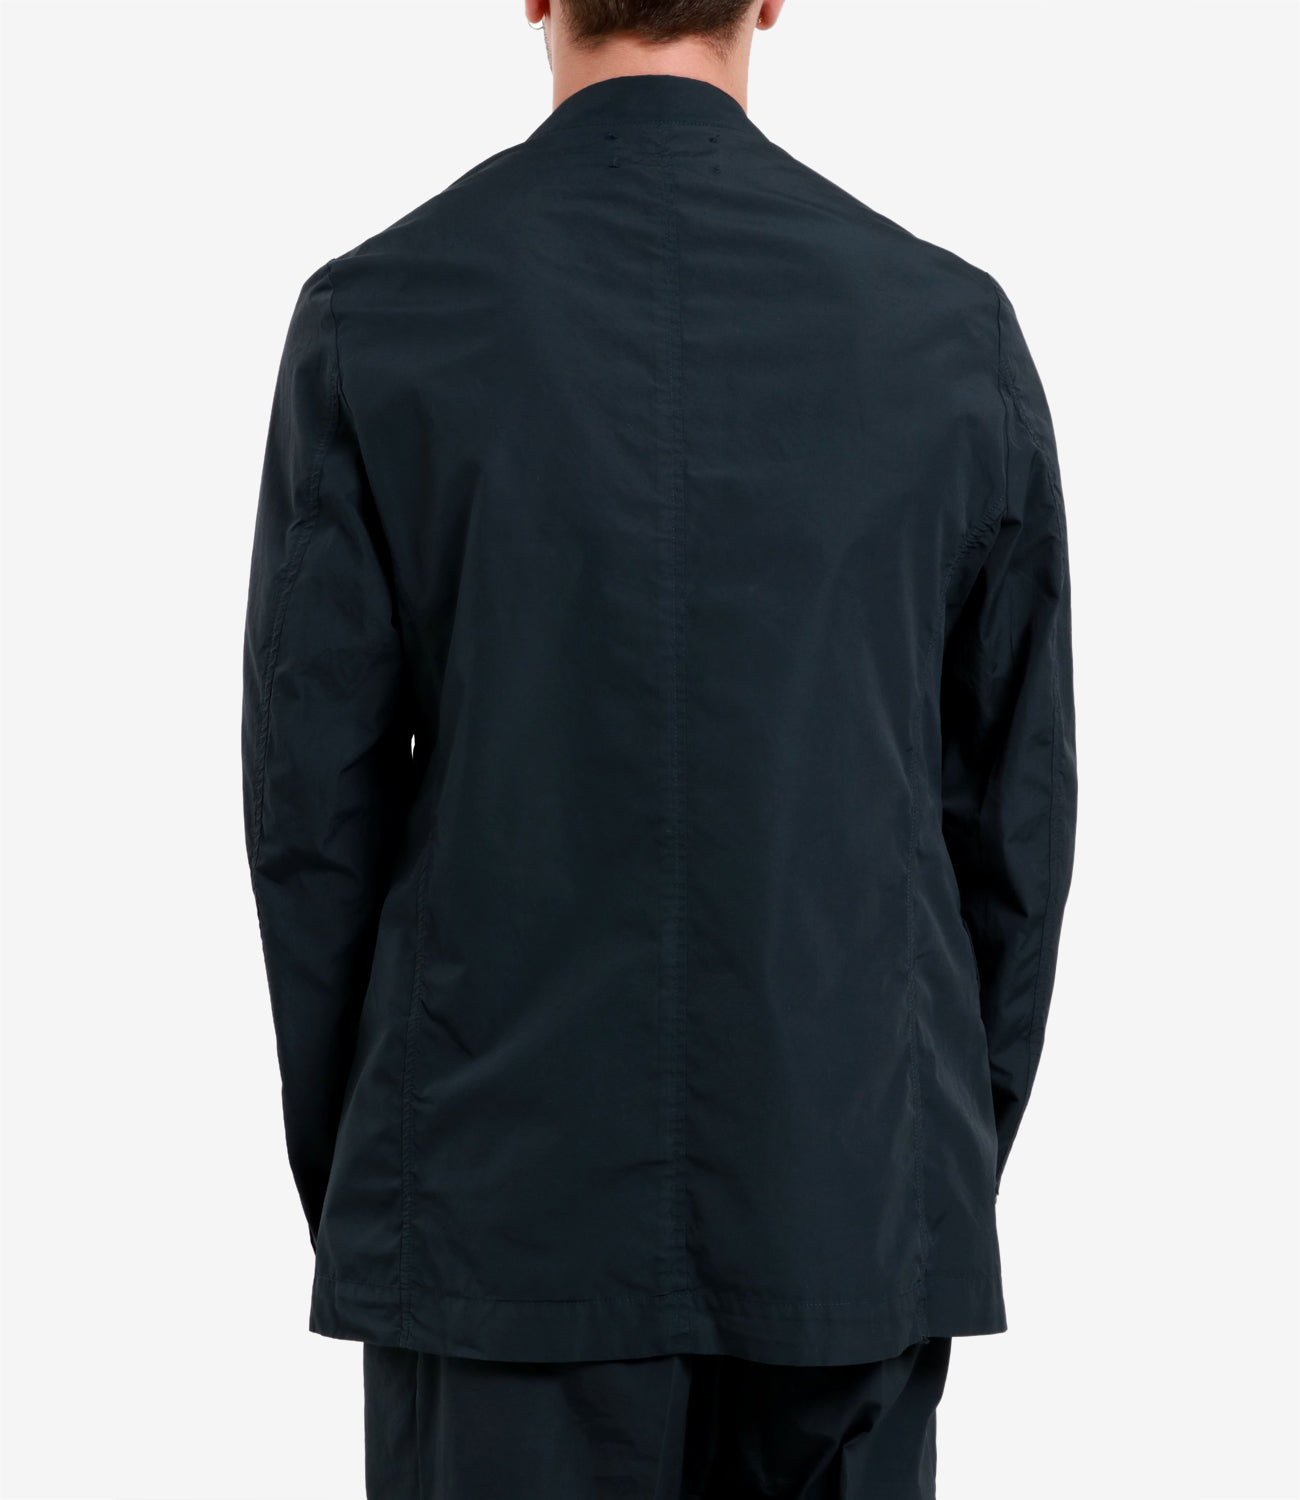 Grifoni | Navy Double Breasted Jacket